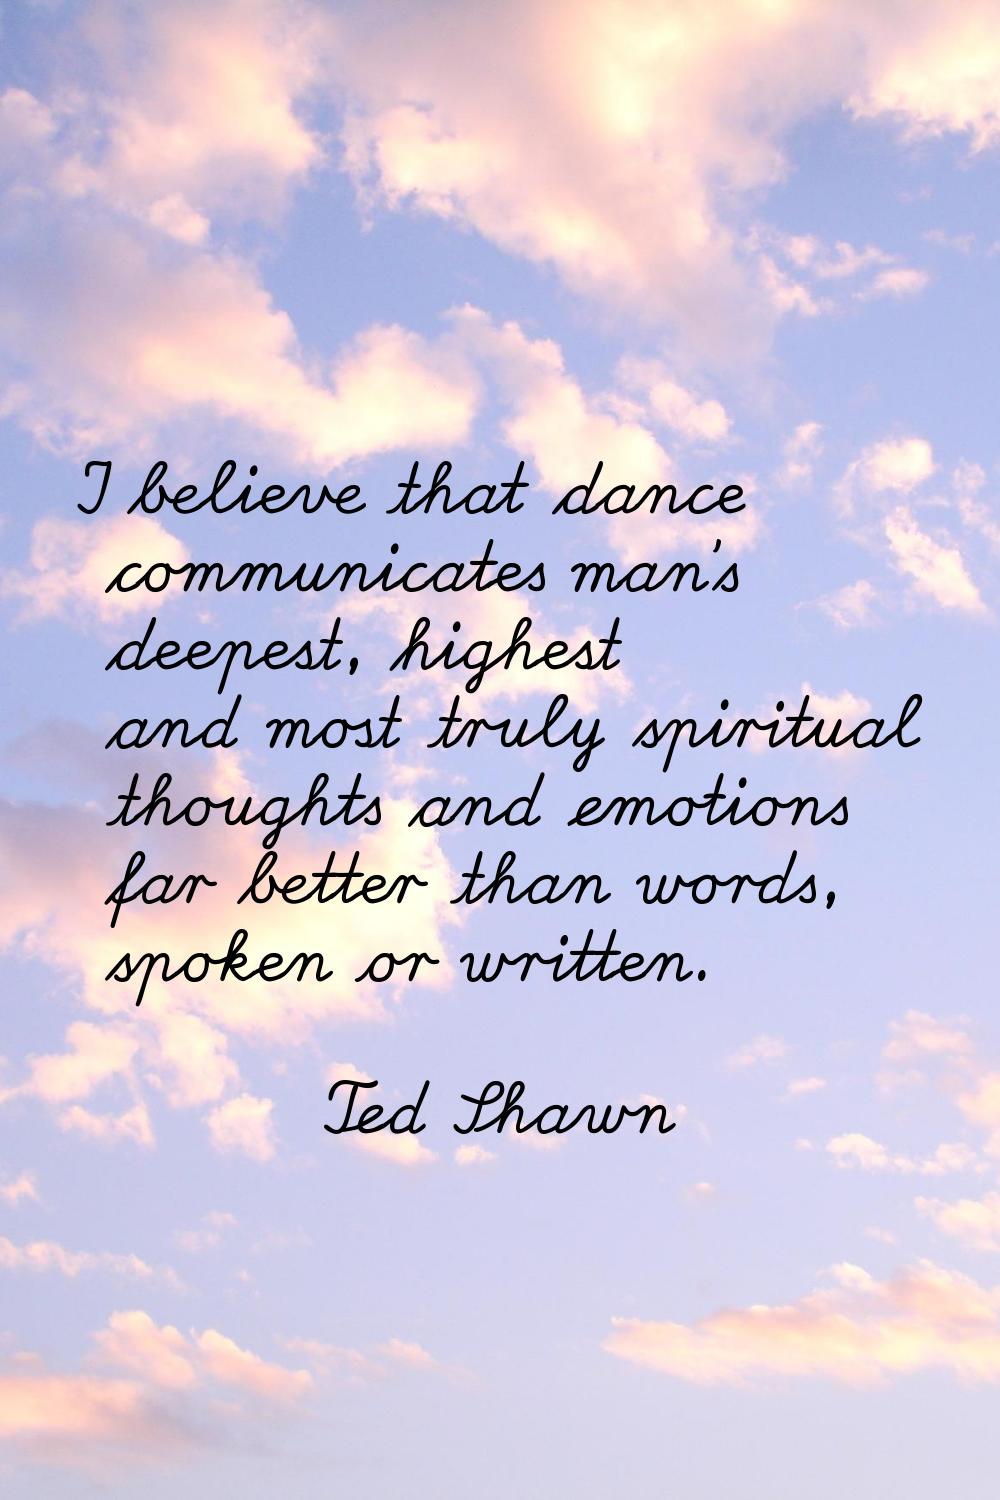 I believe that dance communicates man's deepest, highest and most truly spiritual thoughts and emot